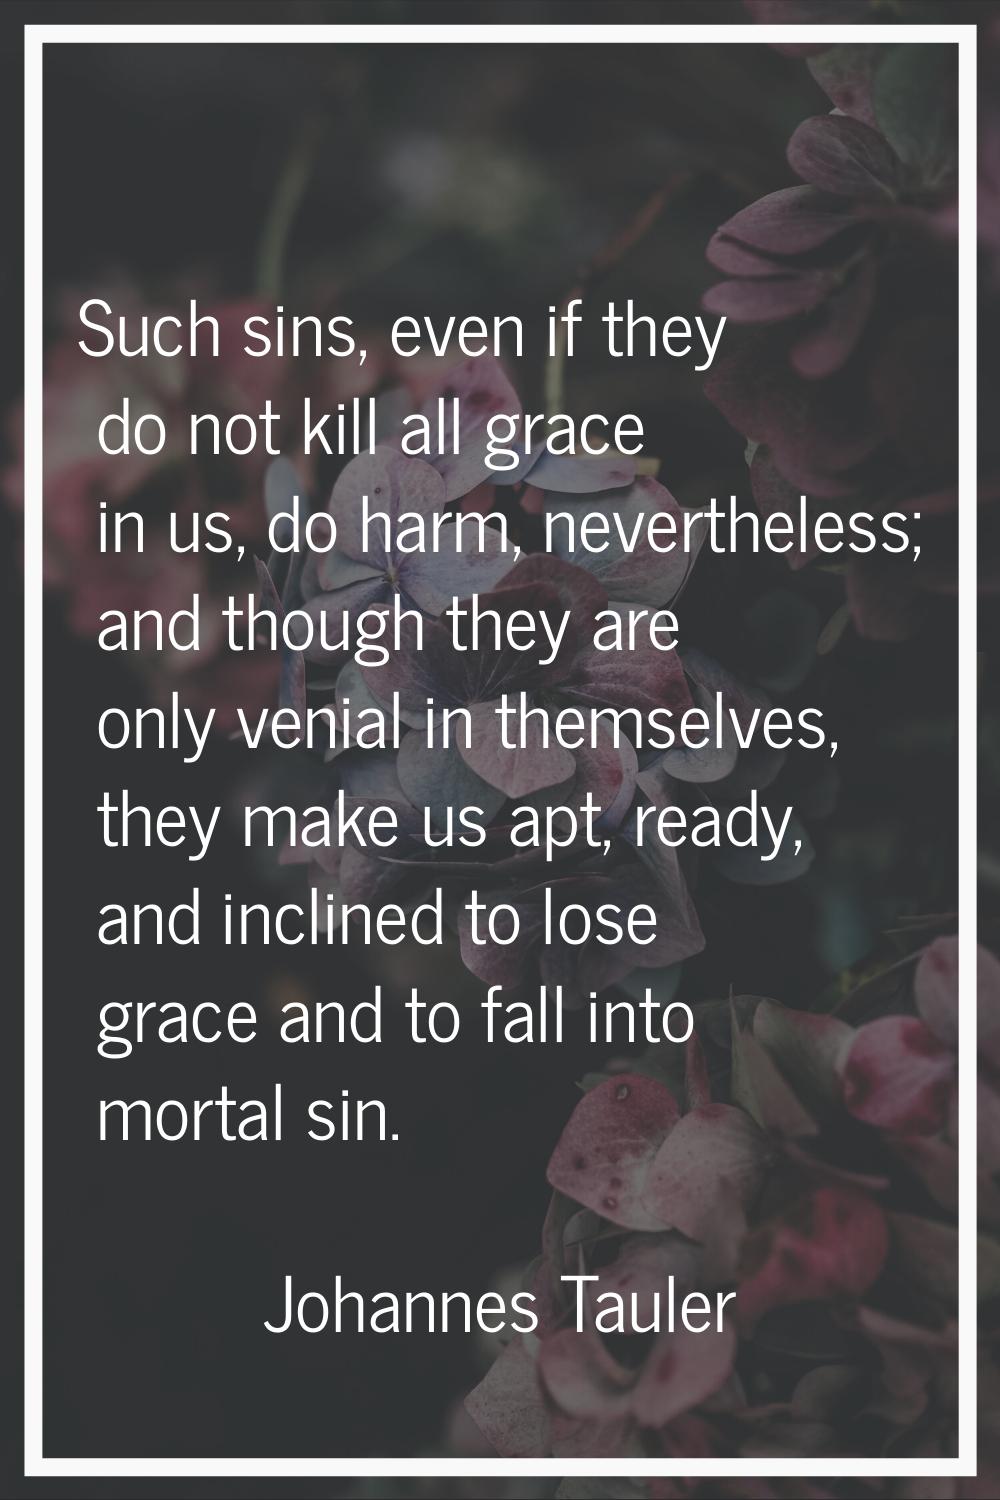 Such sins, even if they do not kill all grace in us, do harm, nevertheless; and though they are onl